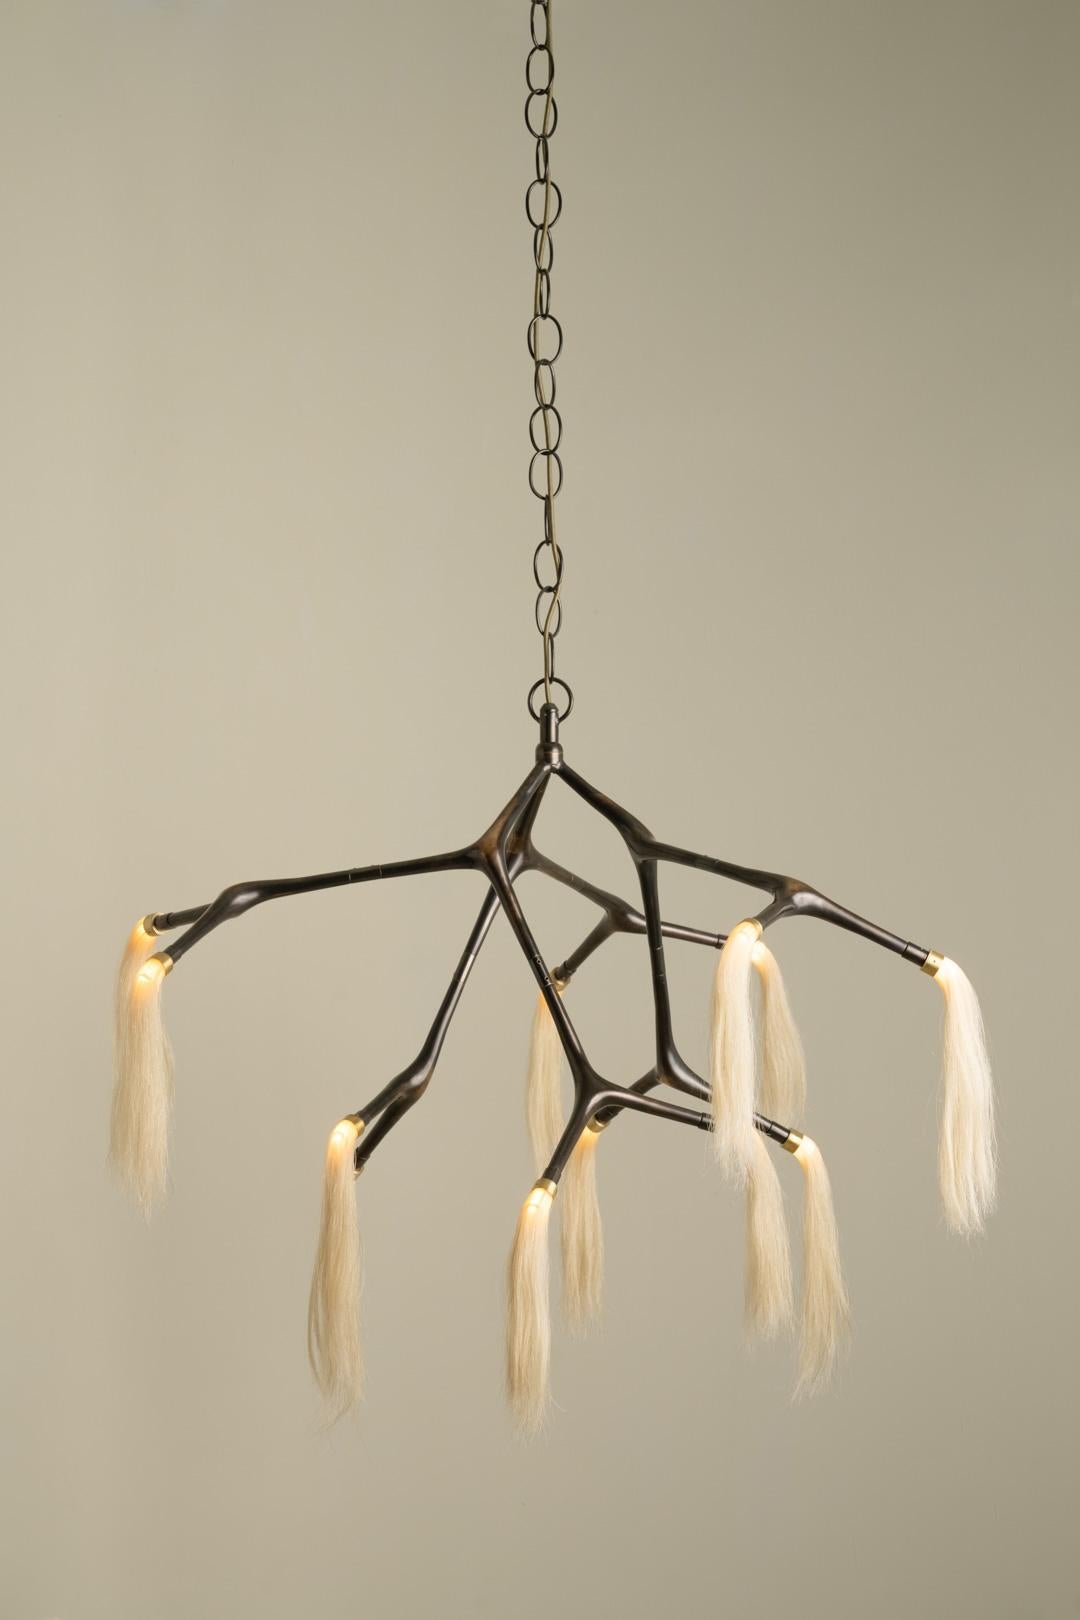 Maratus Horsehair Pendant Lamp by Isabel Moncada
Dimensions: Ø 165 x H 90 cm.
Materials: Bronze, brass and horsehair tassels.
Weight: 14 kg.

A chestnut horse with a white tail is called Palomino, it is dashing and atypical.
This lamp is an allegory